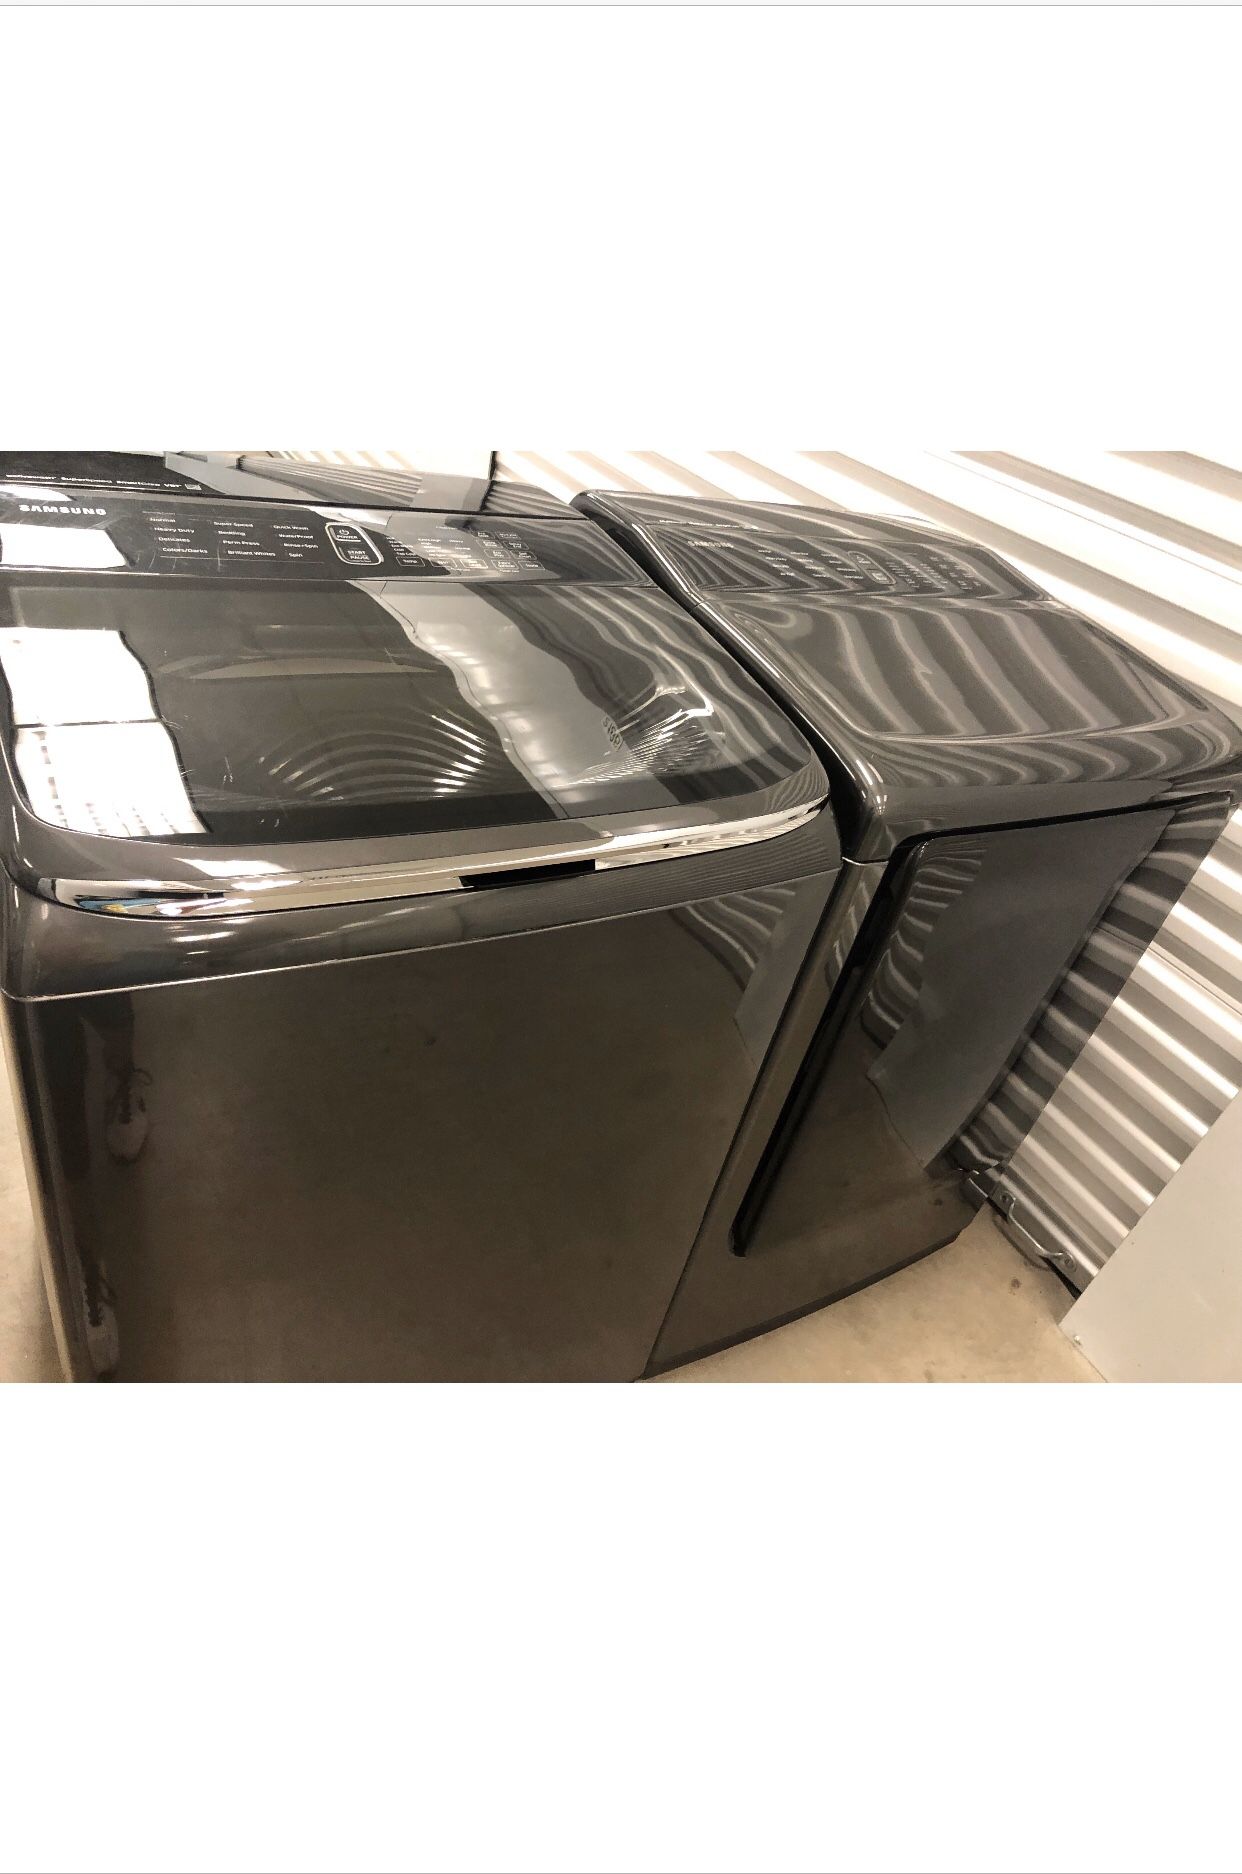 SAMSUNG WASHER AND ELECTRIC STEAM DRYER